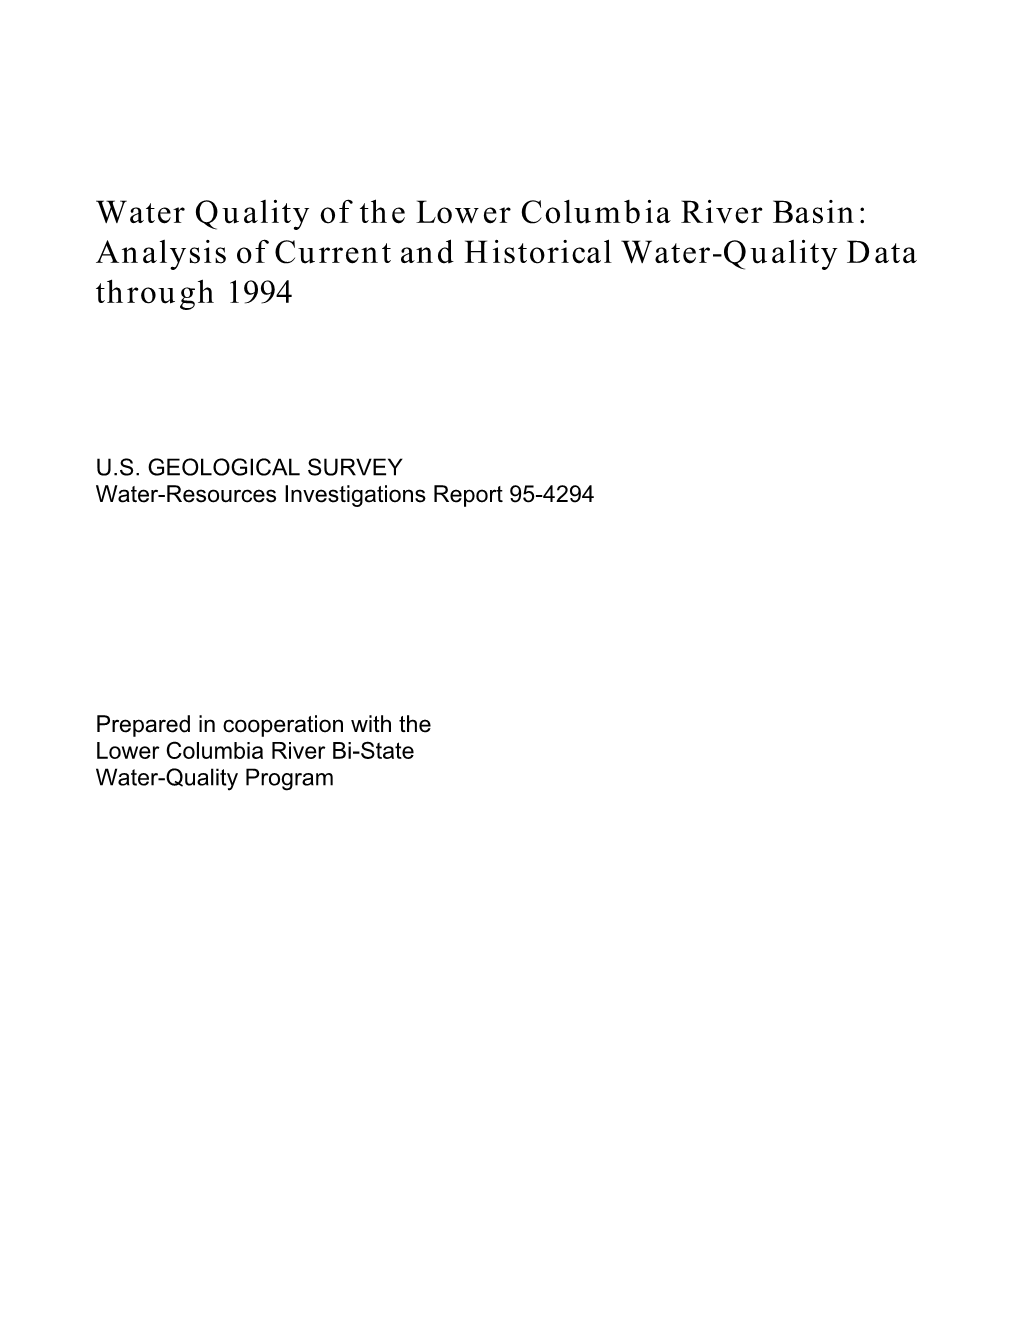 Water Quality of the Lower Columbia River Basin: Analysis of Current and Historical Water-Quality Data Through 1994